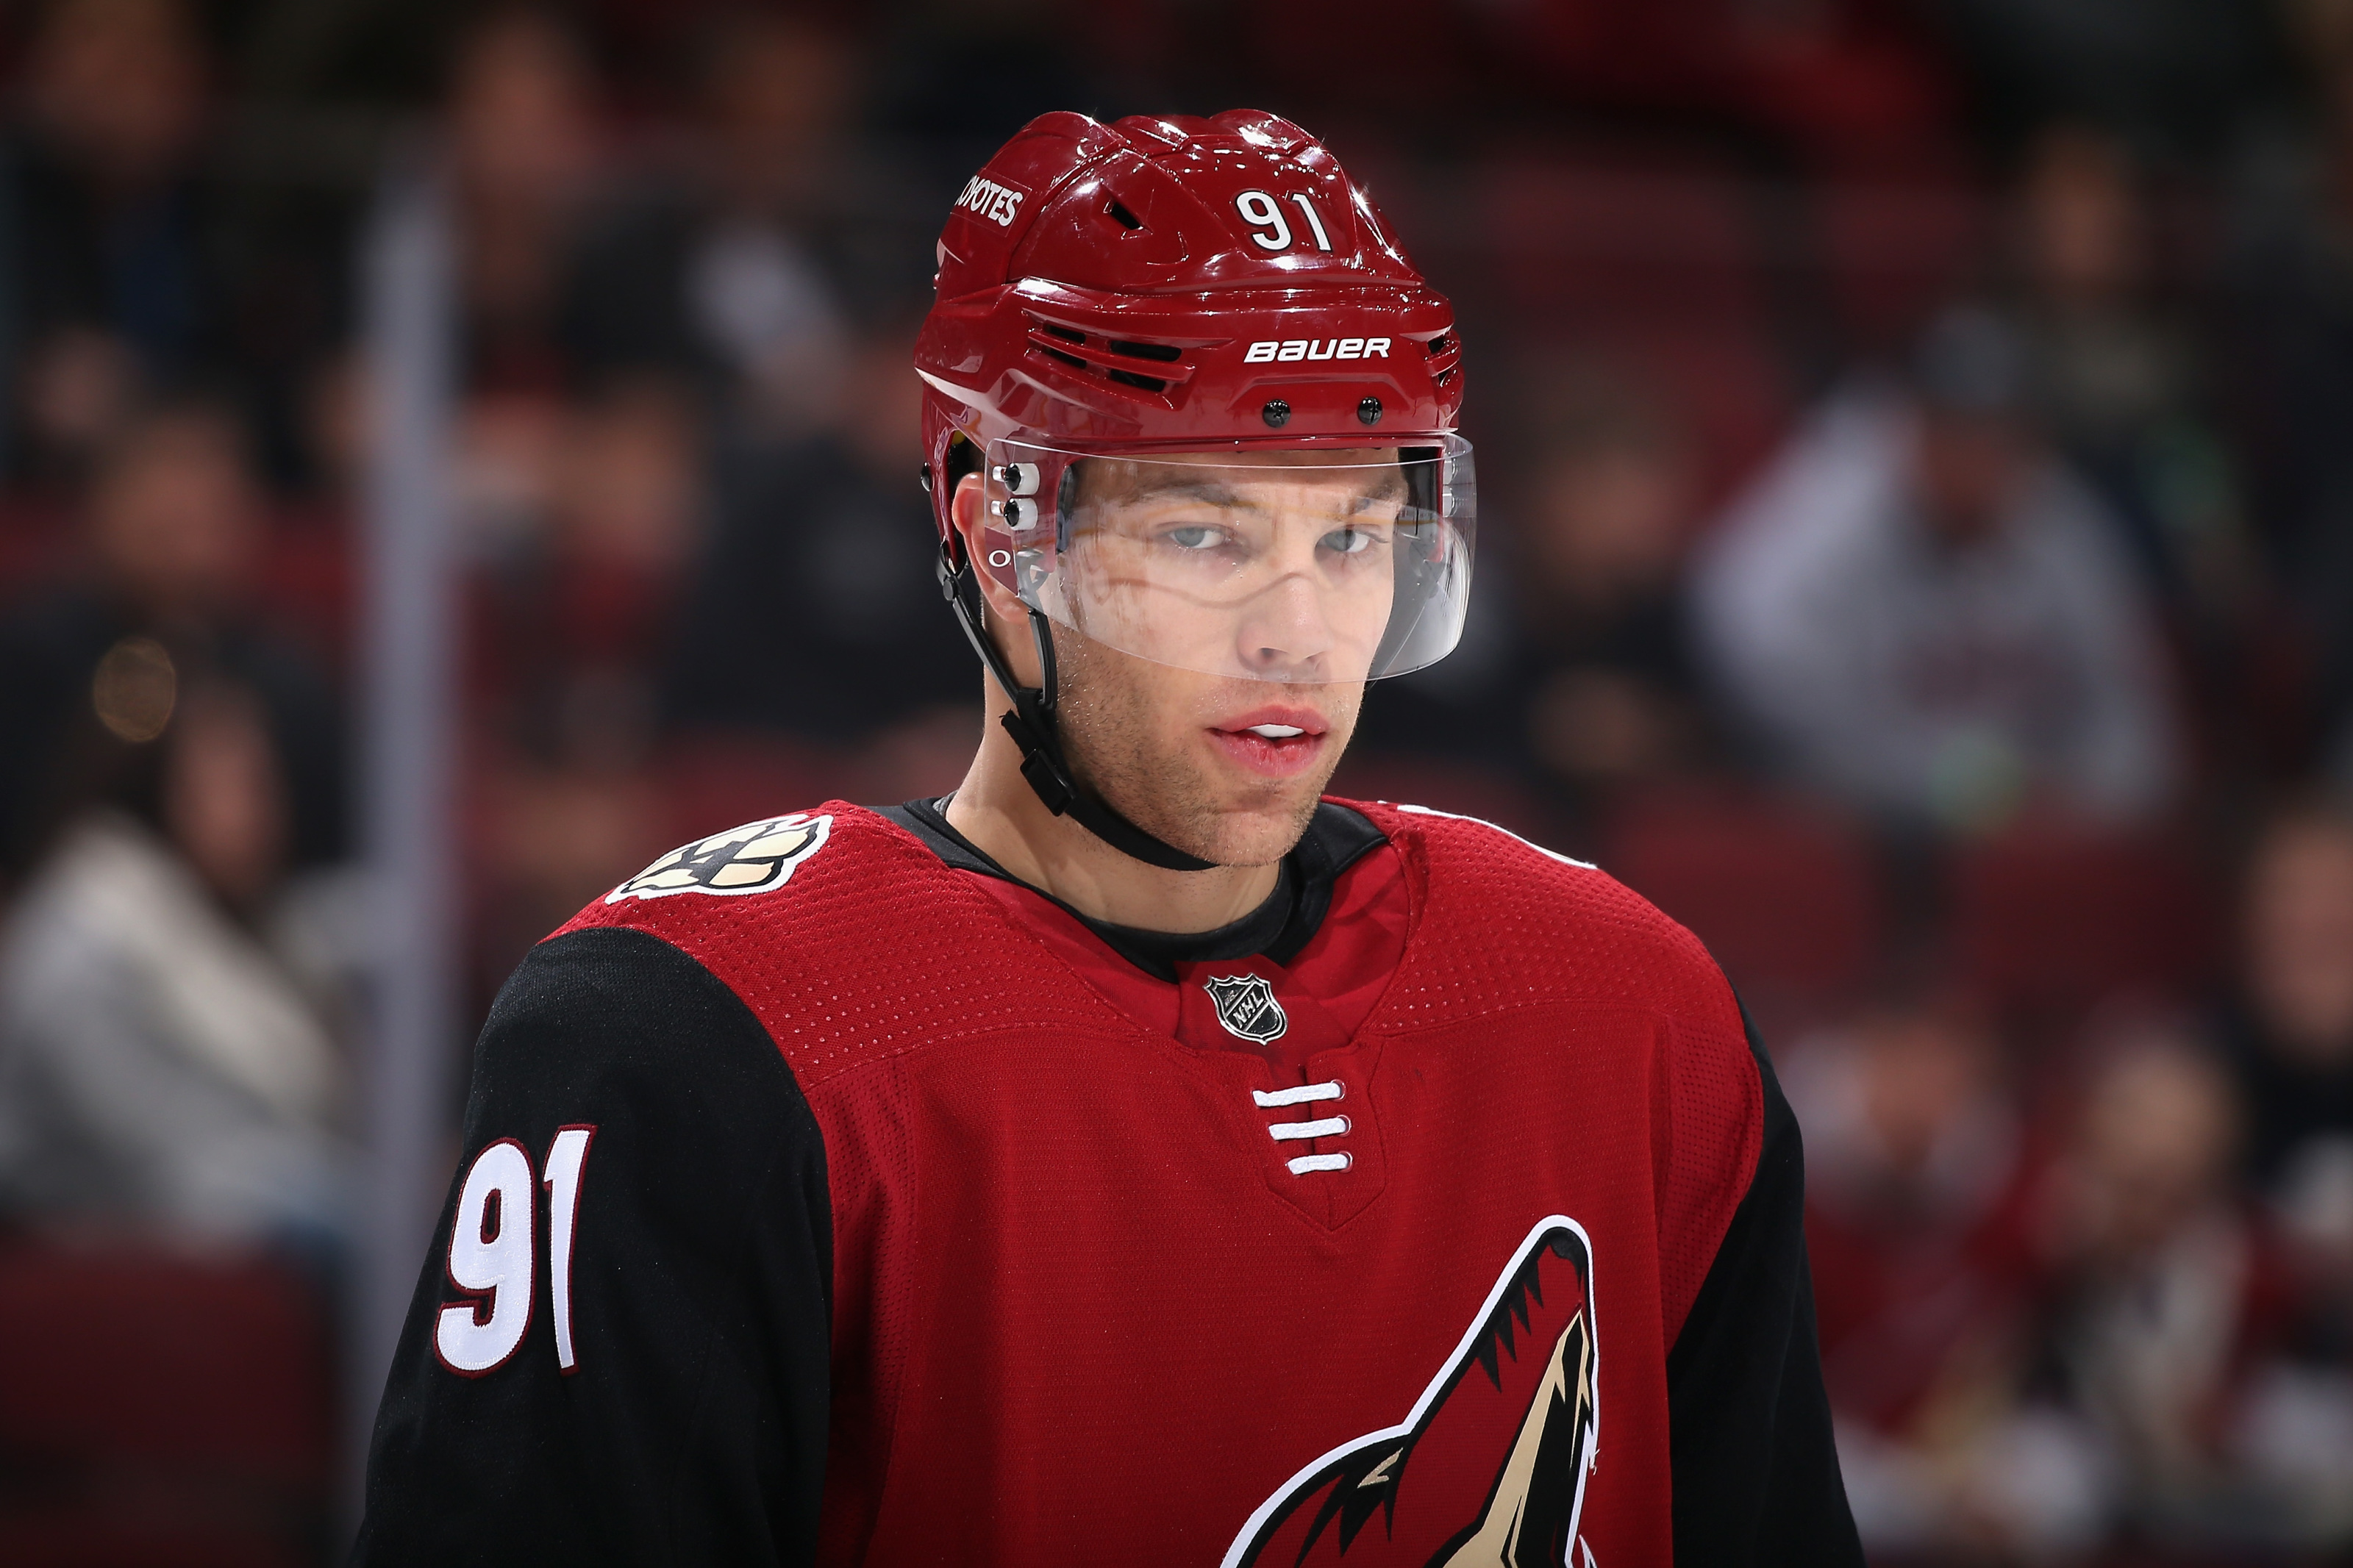 The Arizona Coyotes are running out of time to re-sign Taylor Hall